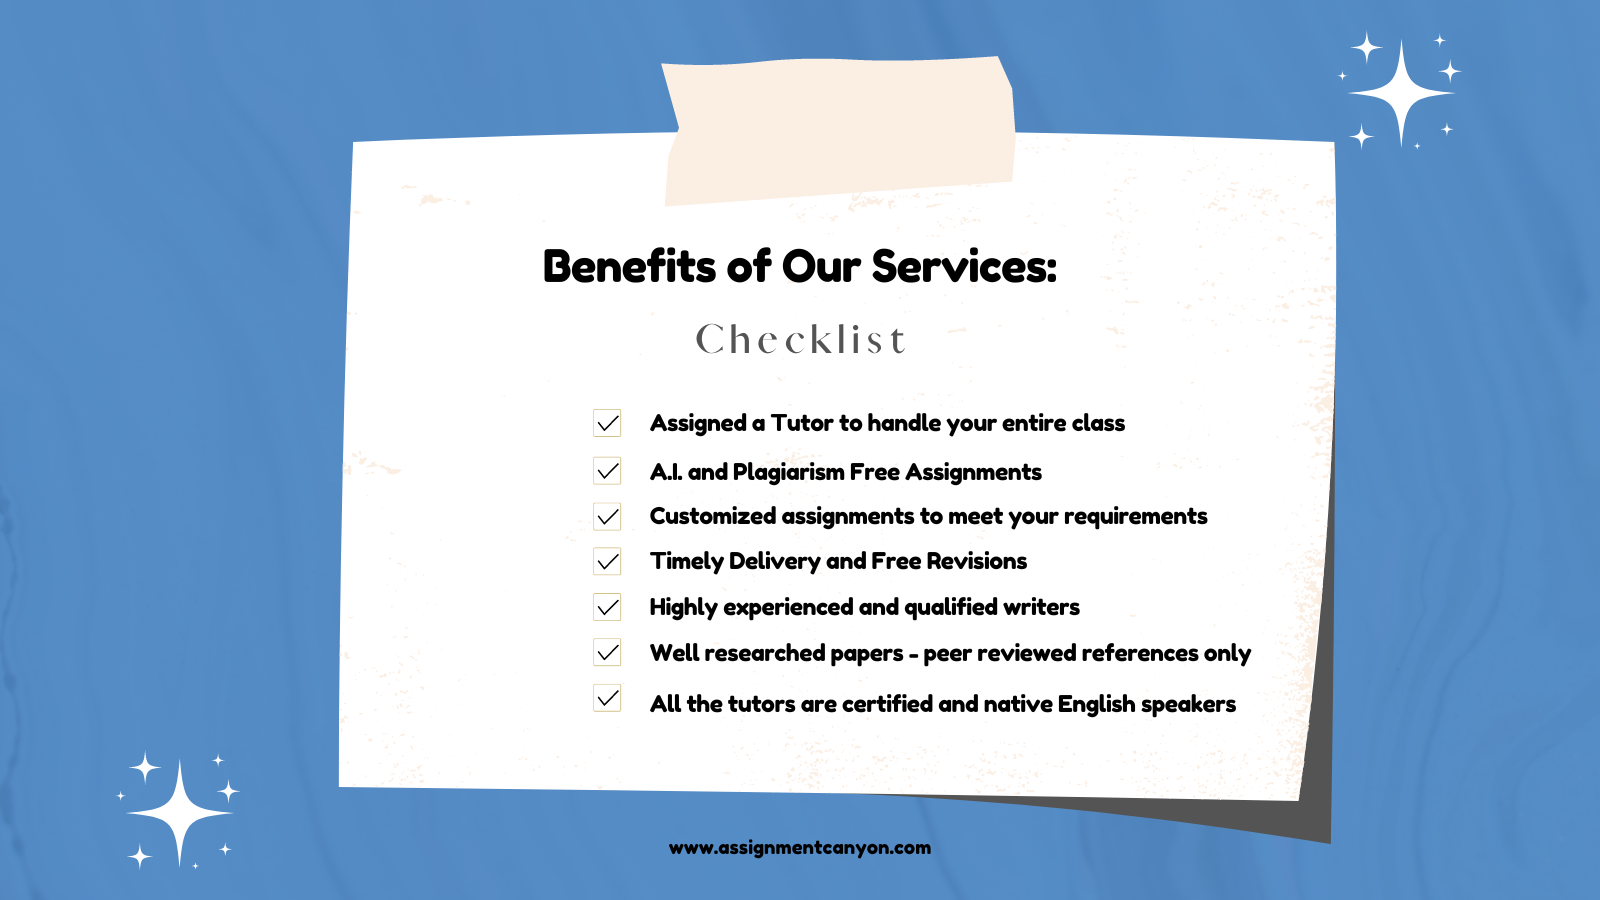 Benefits of Our Services - Offering tutors affordable assignment writing services